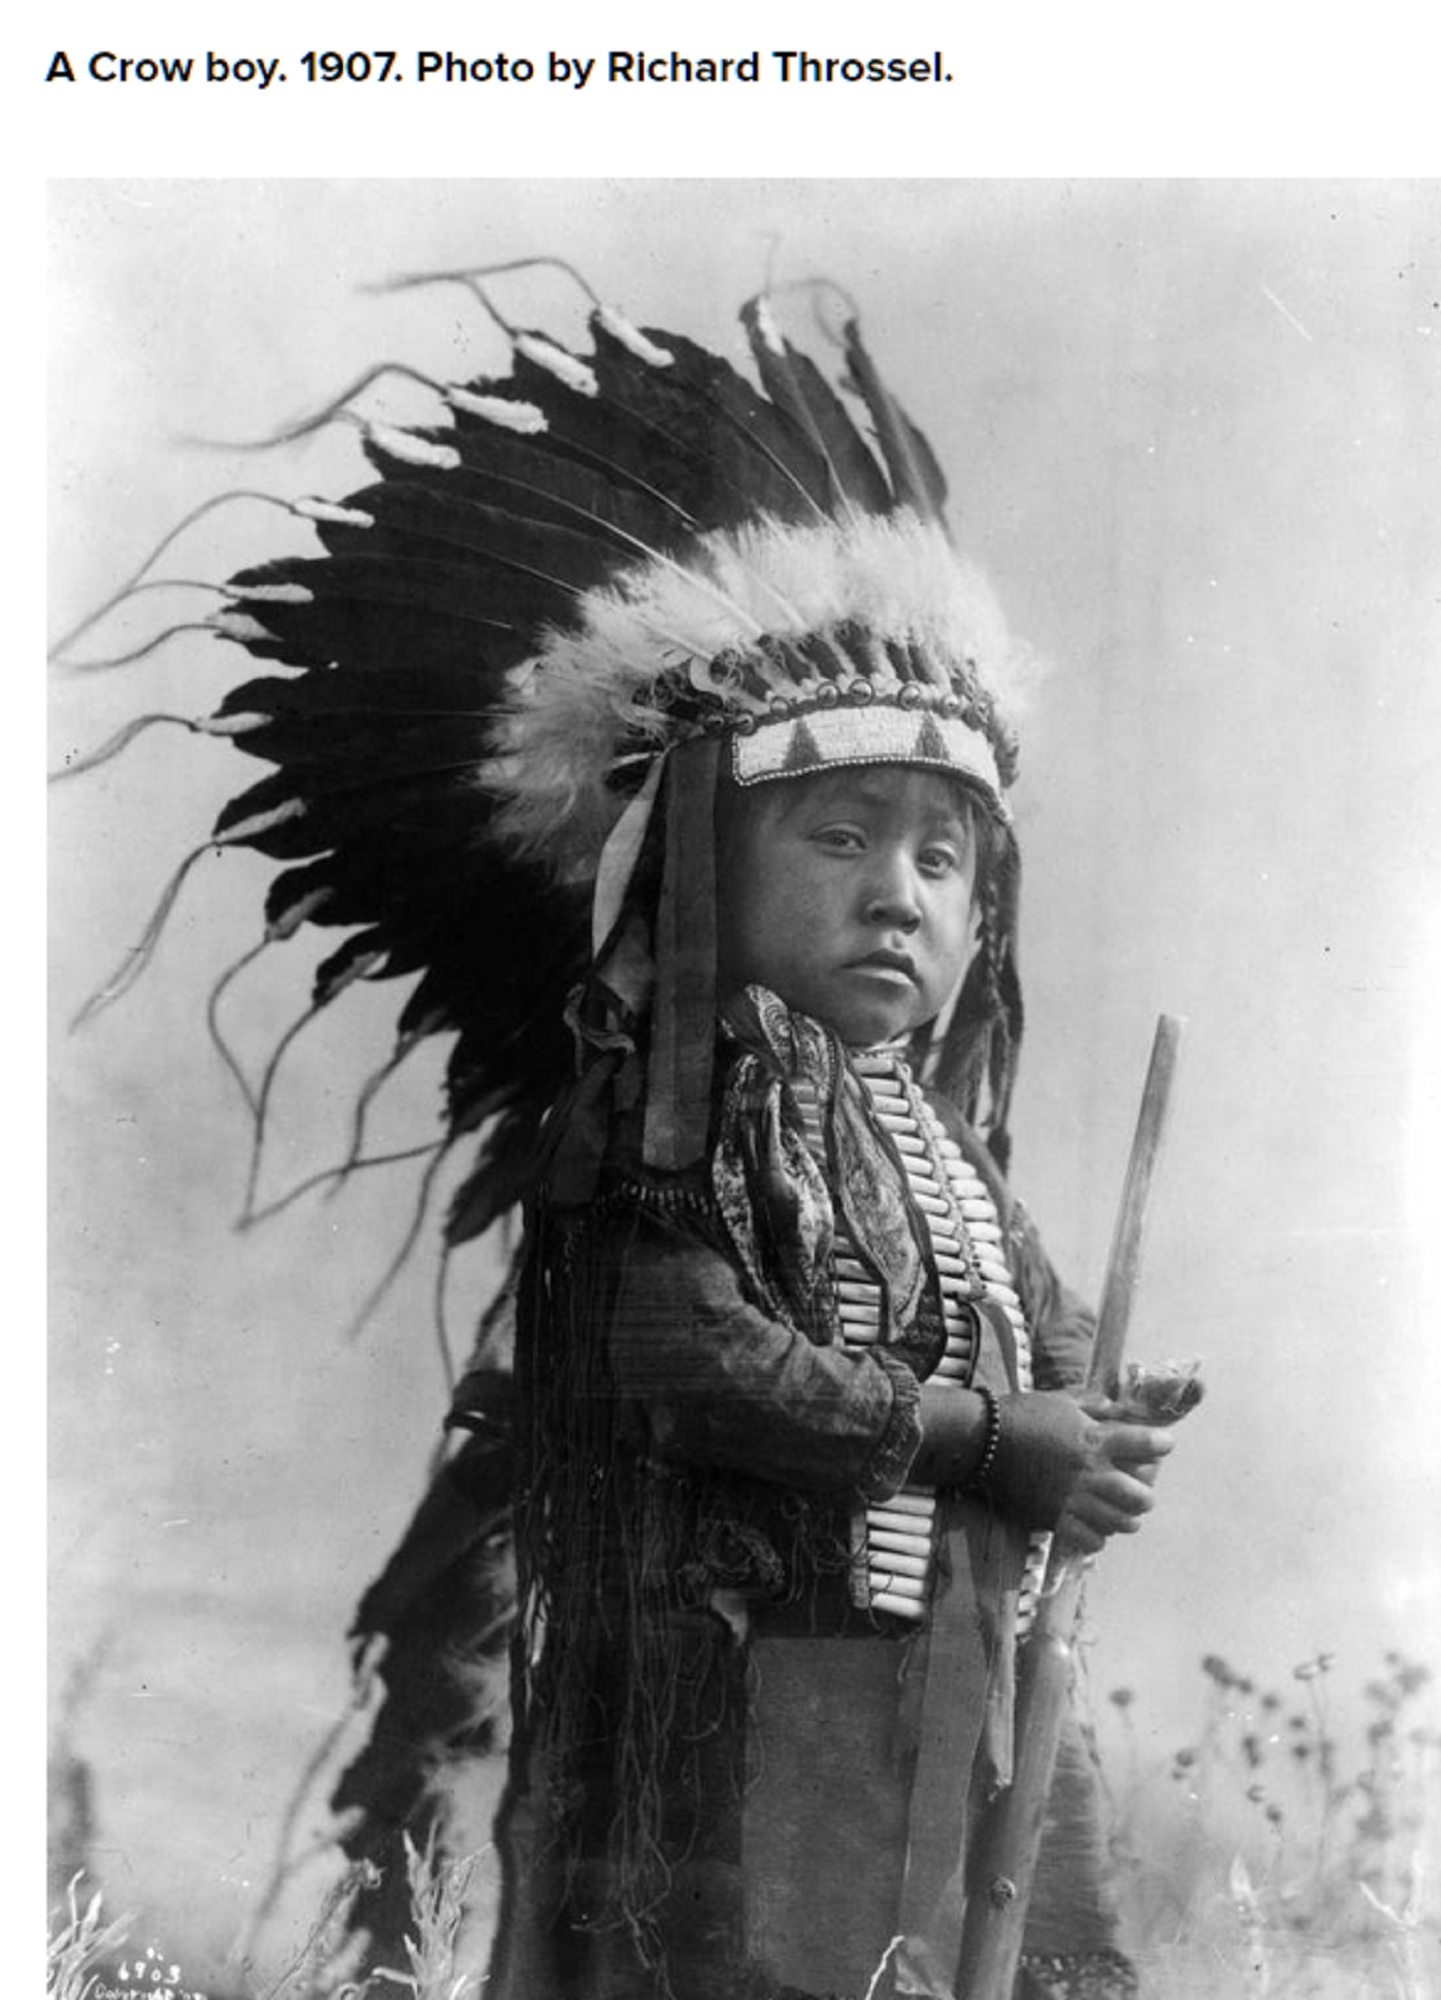 A young crow boy in 1907 screen print